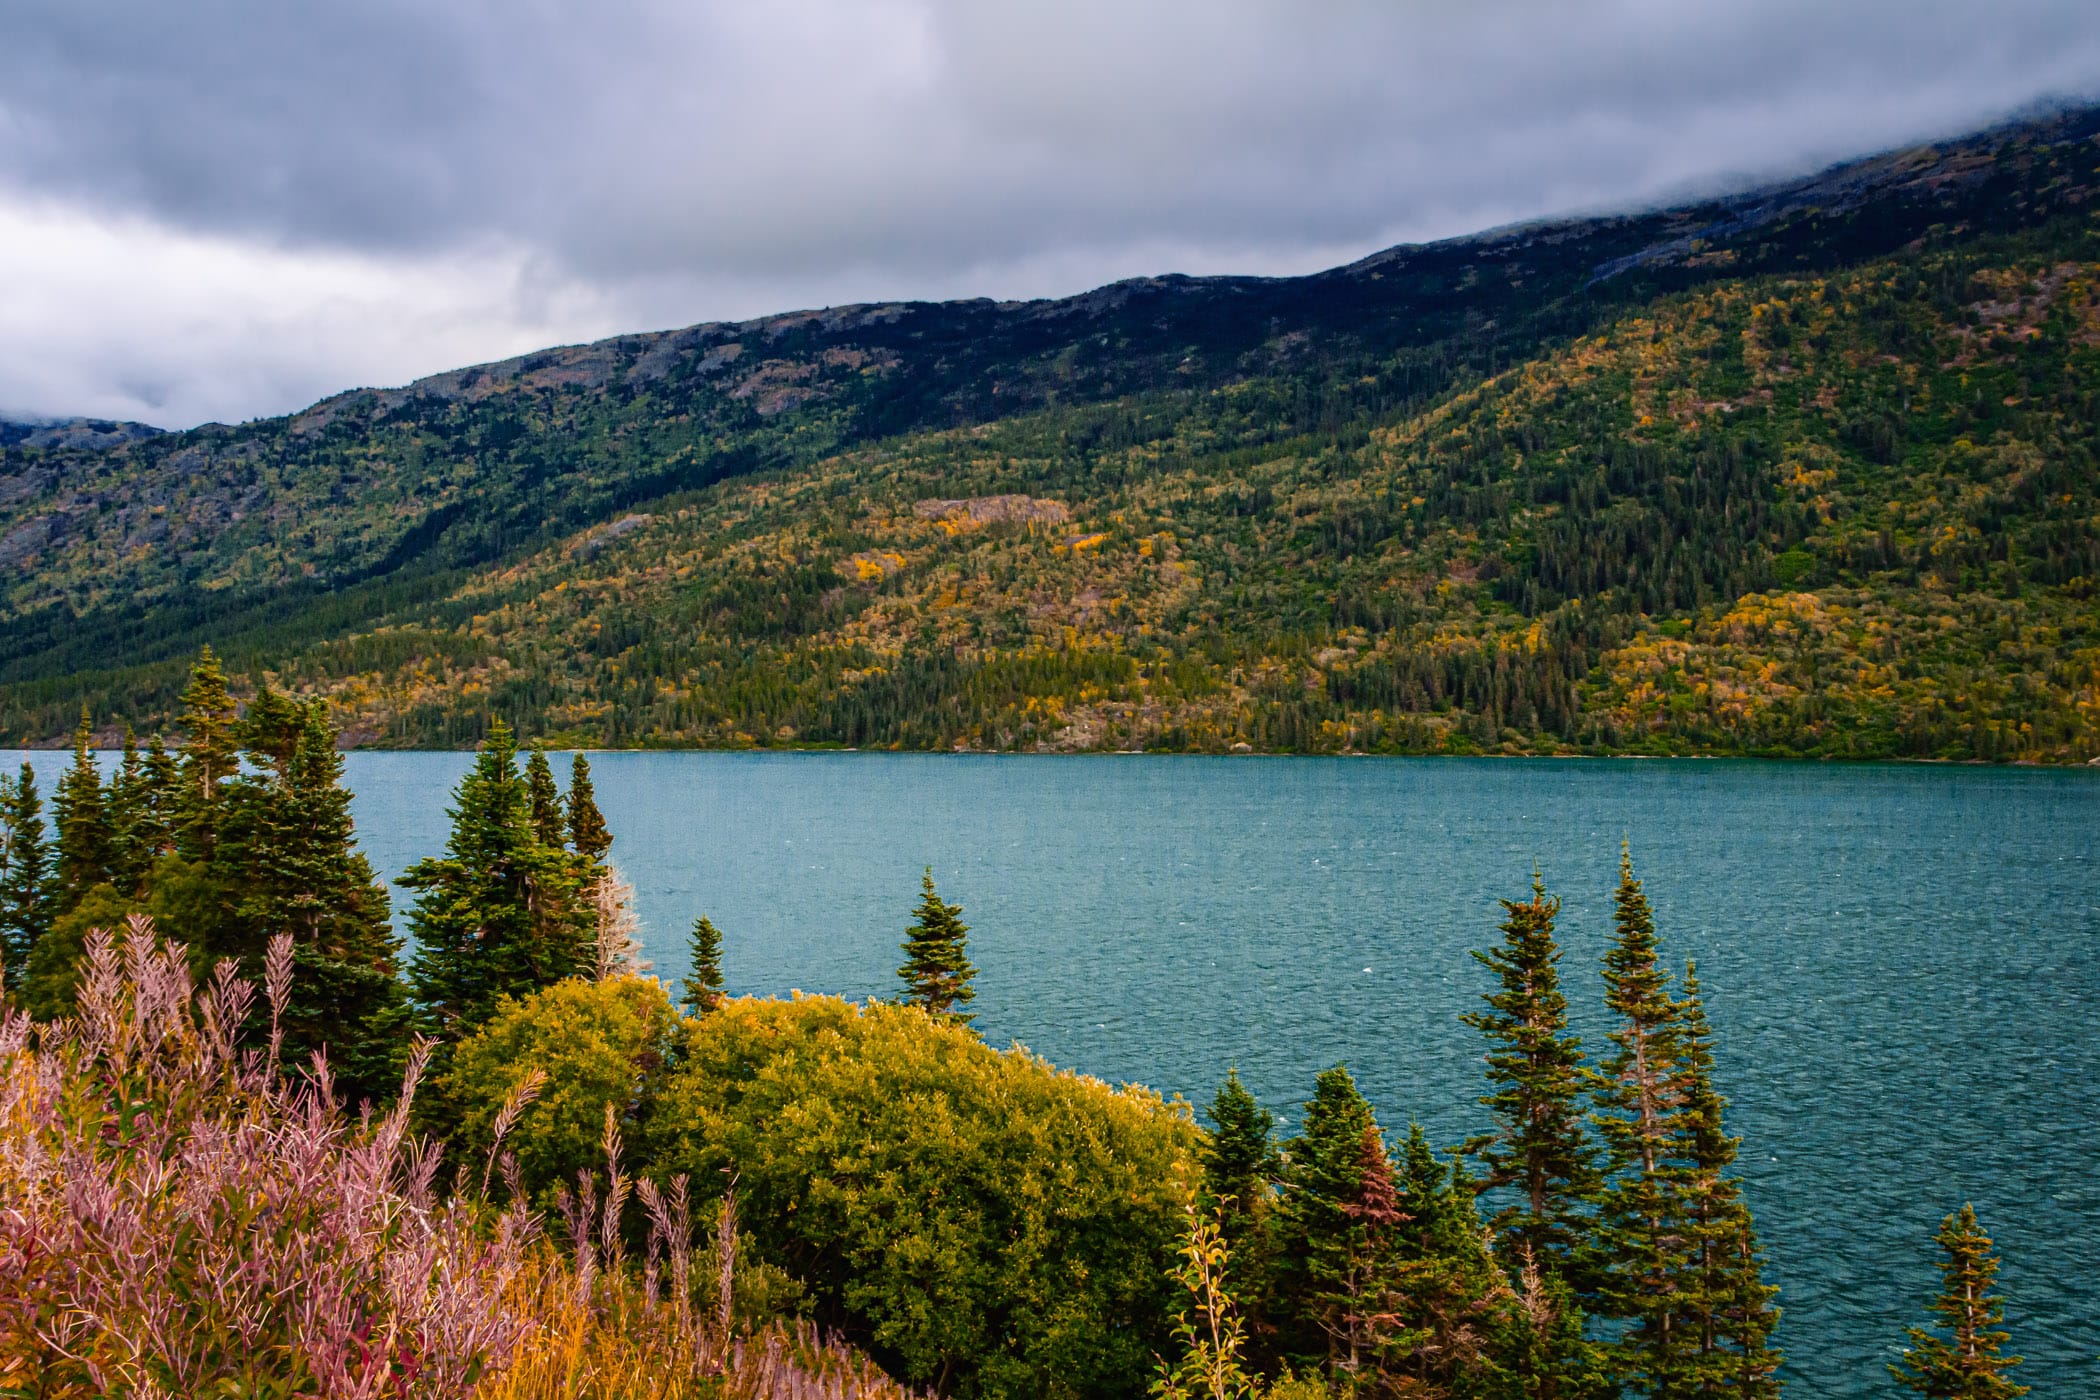 Storm clouds begin to form over Tutshi Lake in the low mountains near Carcross, Yukon Territory, Canada.